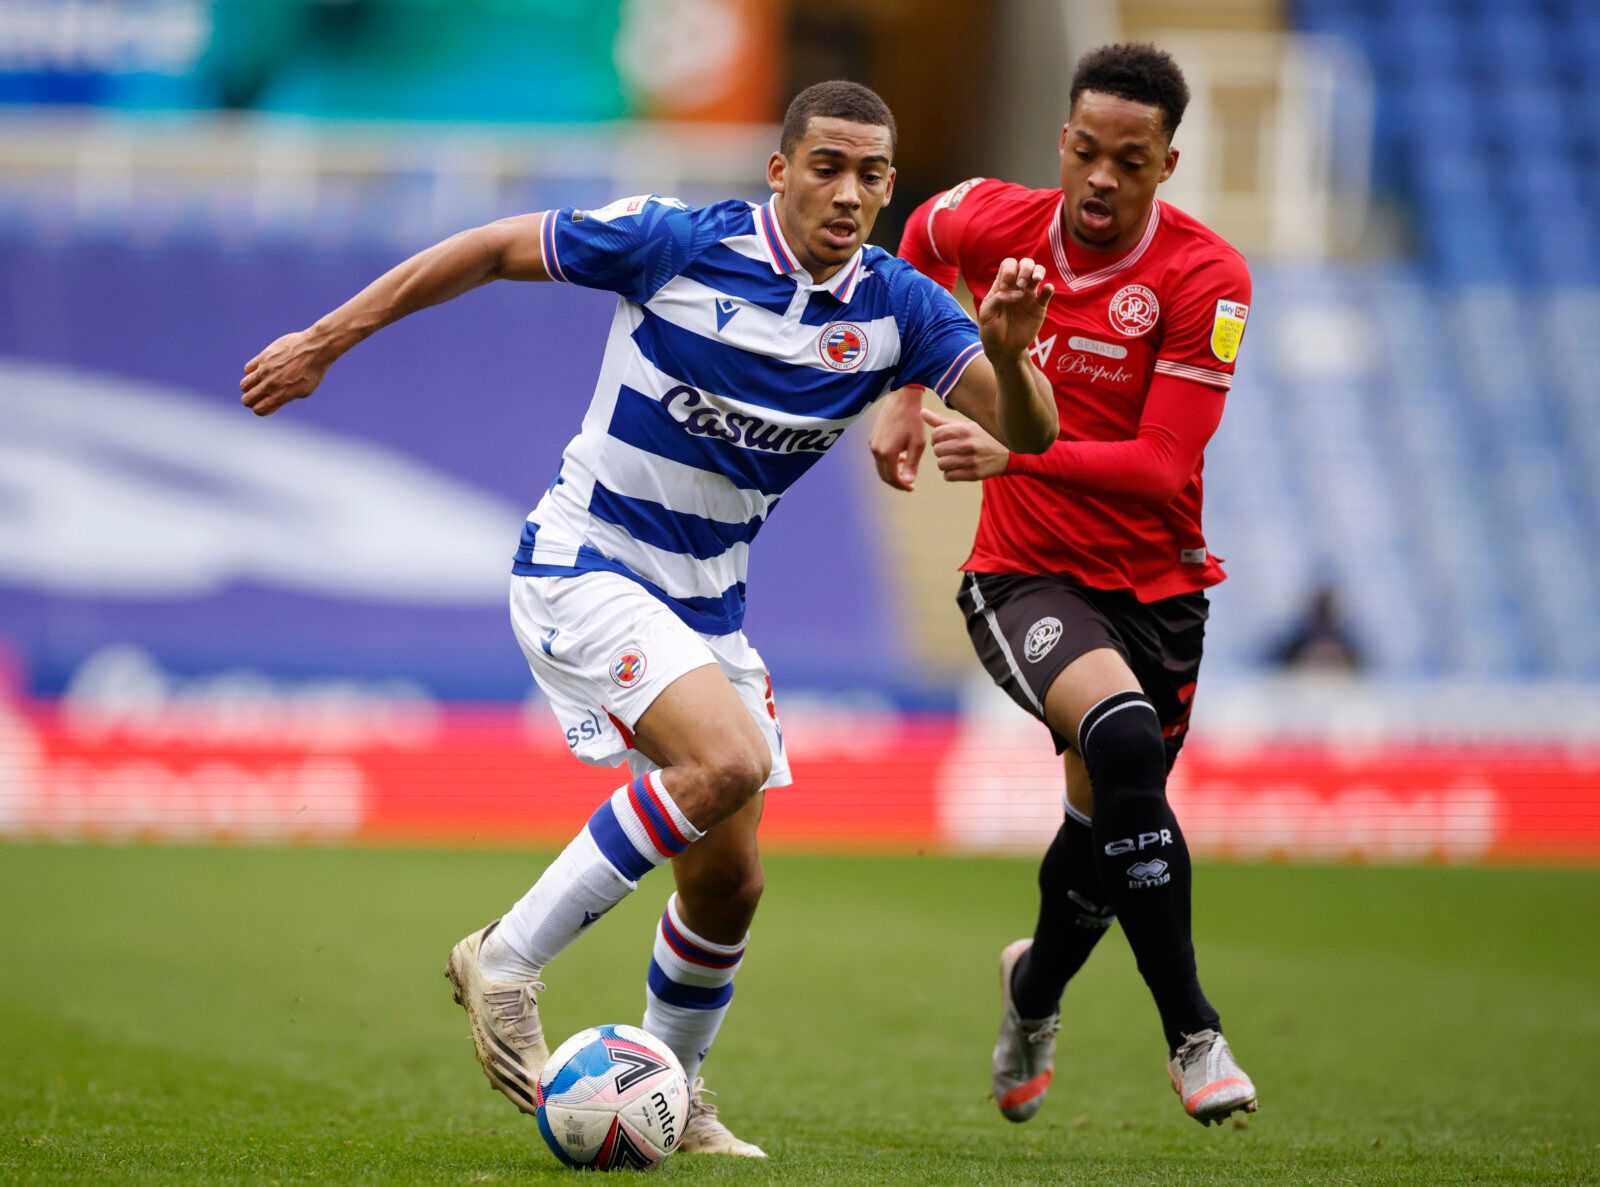 Soccer Football - Championship - Reading v Queens Park Rangers - Madejski Stadium, Reading, Britain - March 20, 2021 Reading's Andy Rinomhota in action with Queens Park Rangers' Chris Willock Action Images/John Sibley EDITORIAL USE ONLY. No use with unauthorized audio, video, data, fixture lists, club/league logos or 'live' services. Online in-match use limited to 75 images, no video emulation. No use in betting, games or single club /league/player publications.  Please contact your account repr